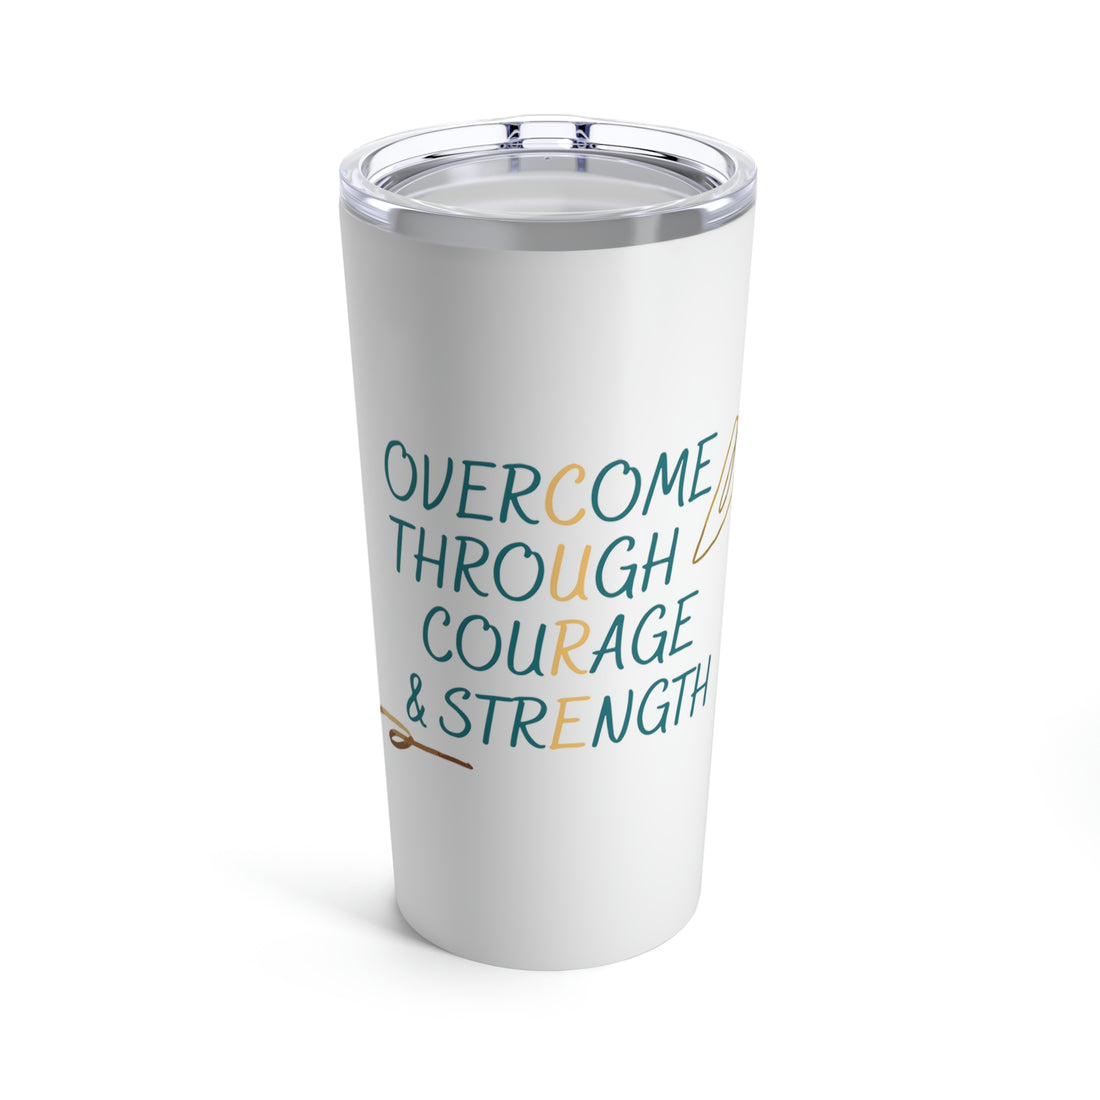 Overcome Through Courage and Strength - Tumbler 20oz